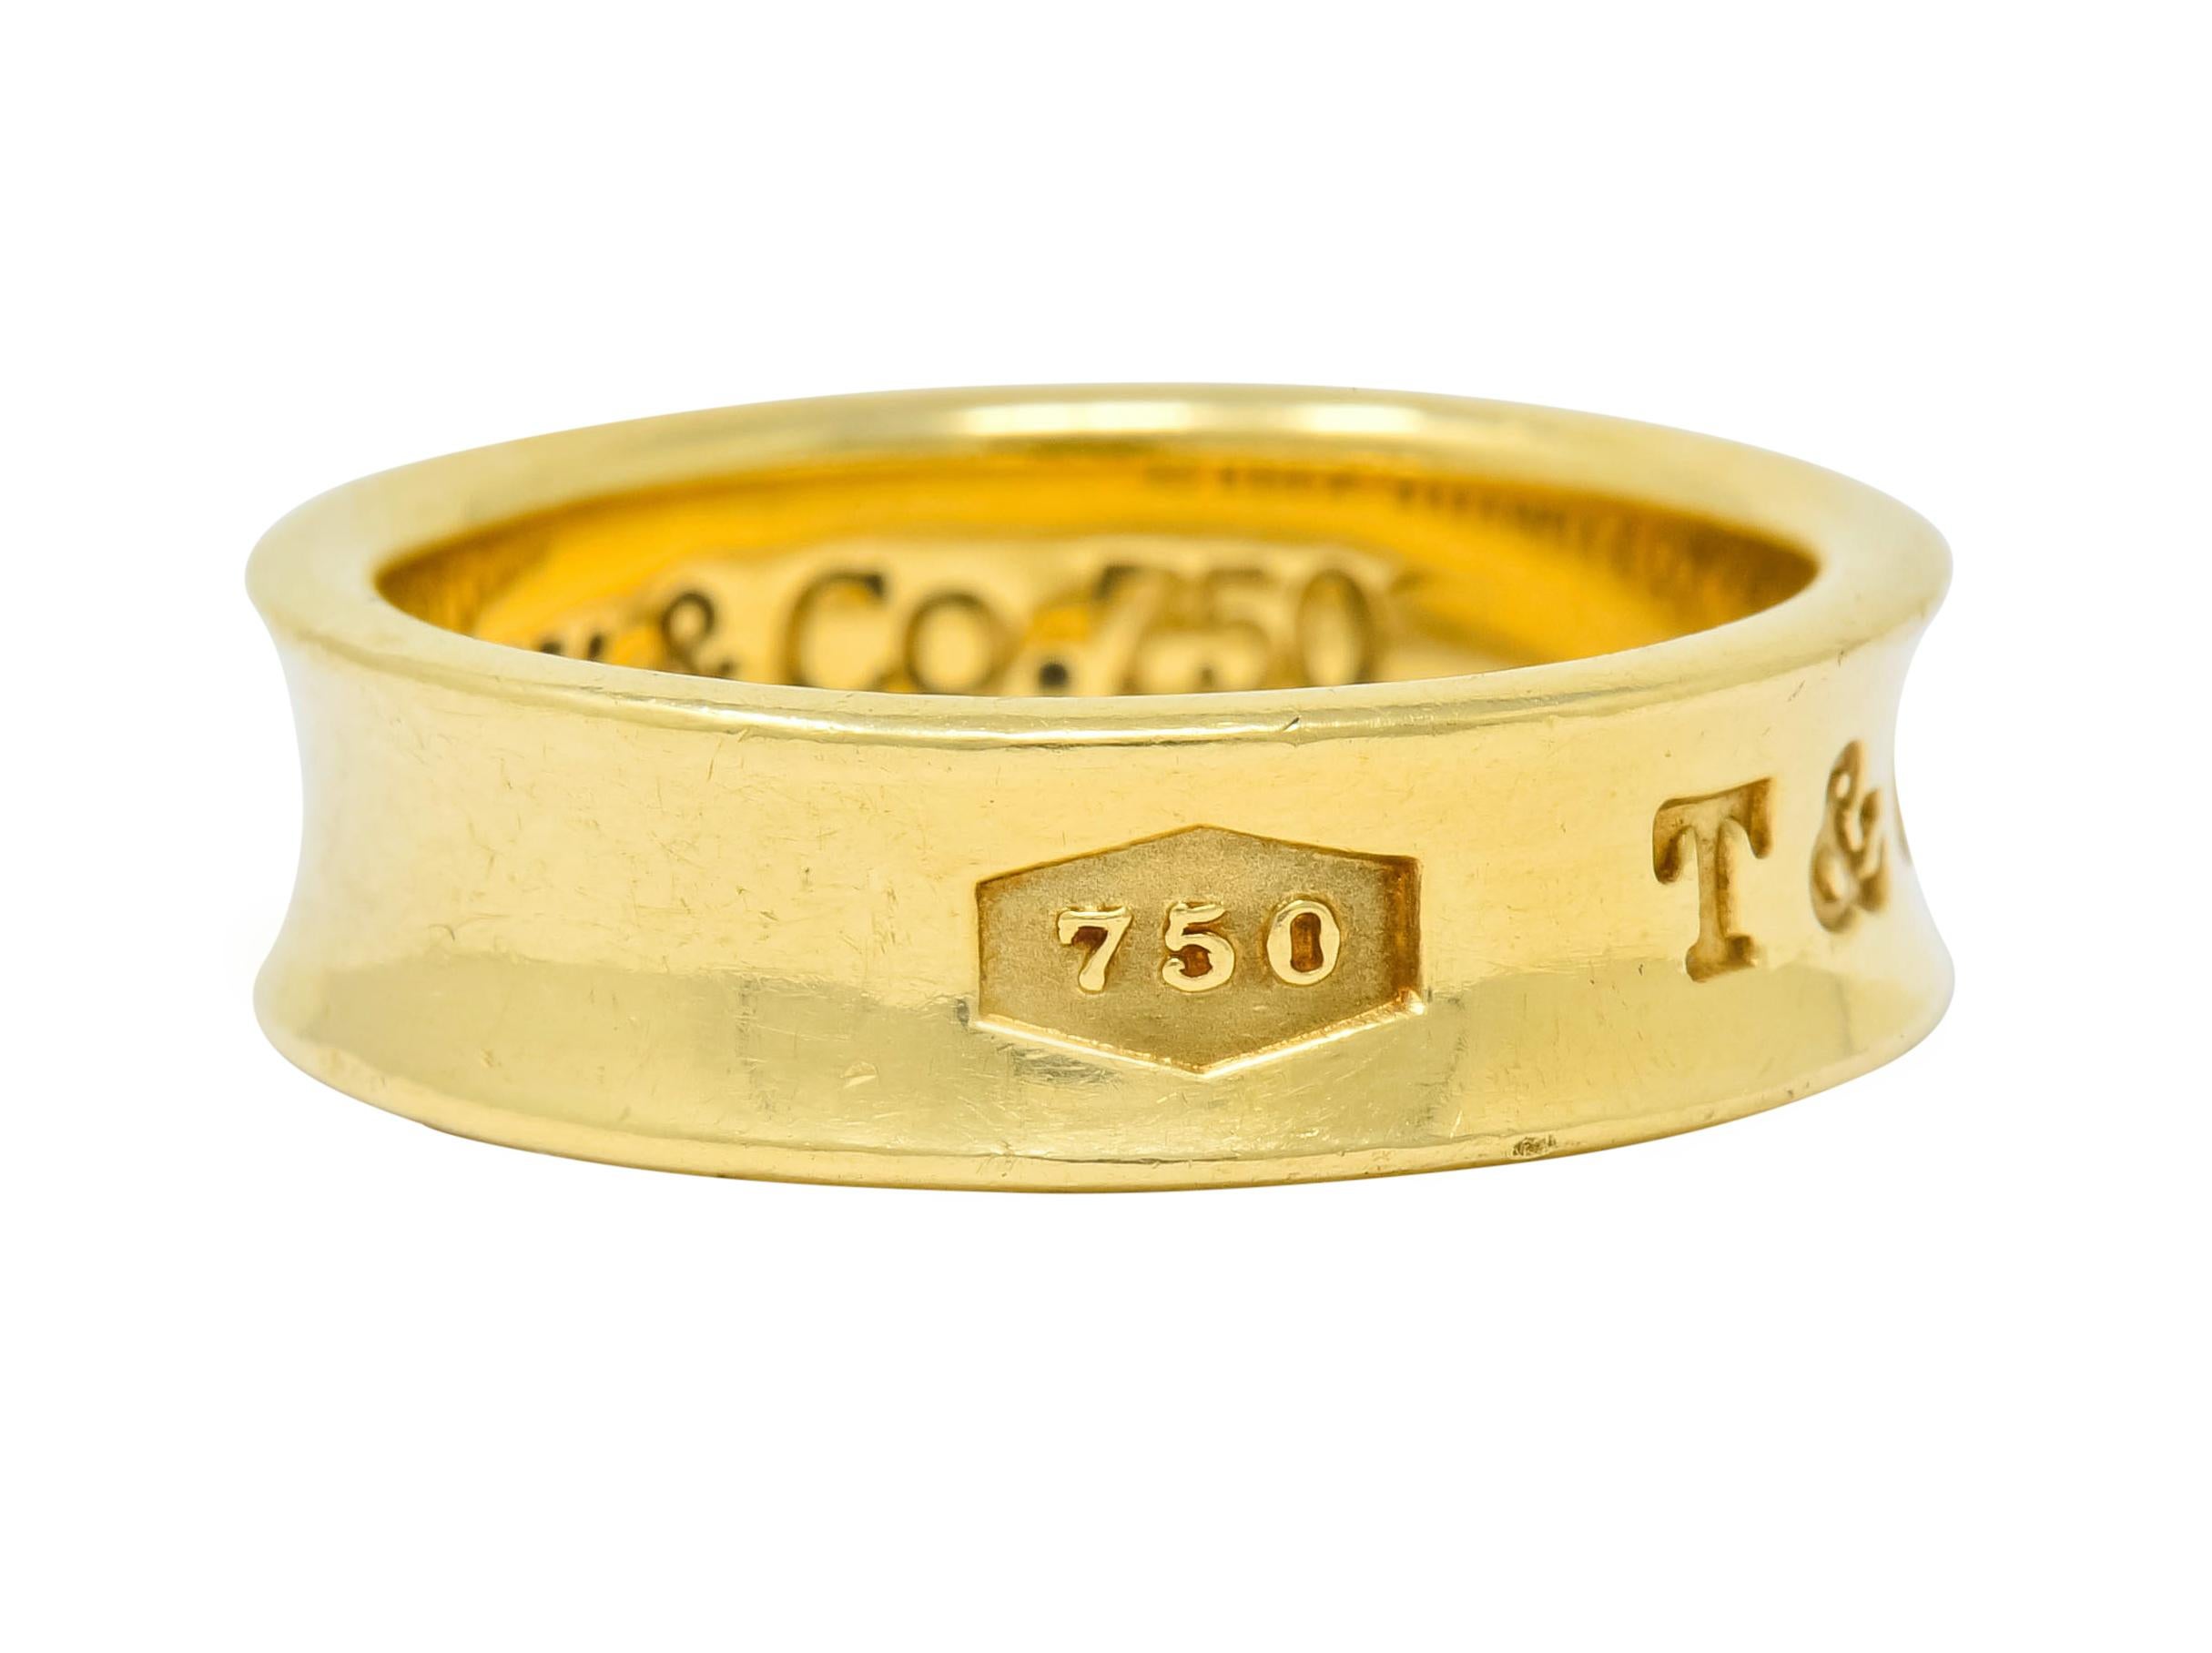 High polished gold band with recessed central groove

Deeply engraved to front 750, T & Co., and 1837

From the celebratory Tiffany 1837 Collection

Inner shank fully signed Tiffany & Co. 1997

Stamped 750 for 18 karat gold

Ring Size: 6 1/2 & not